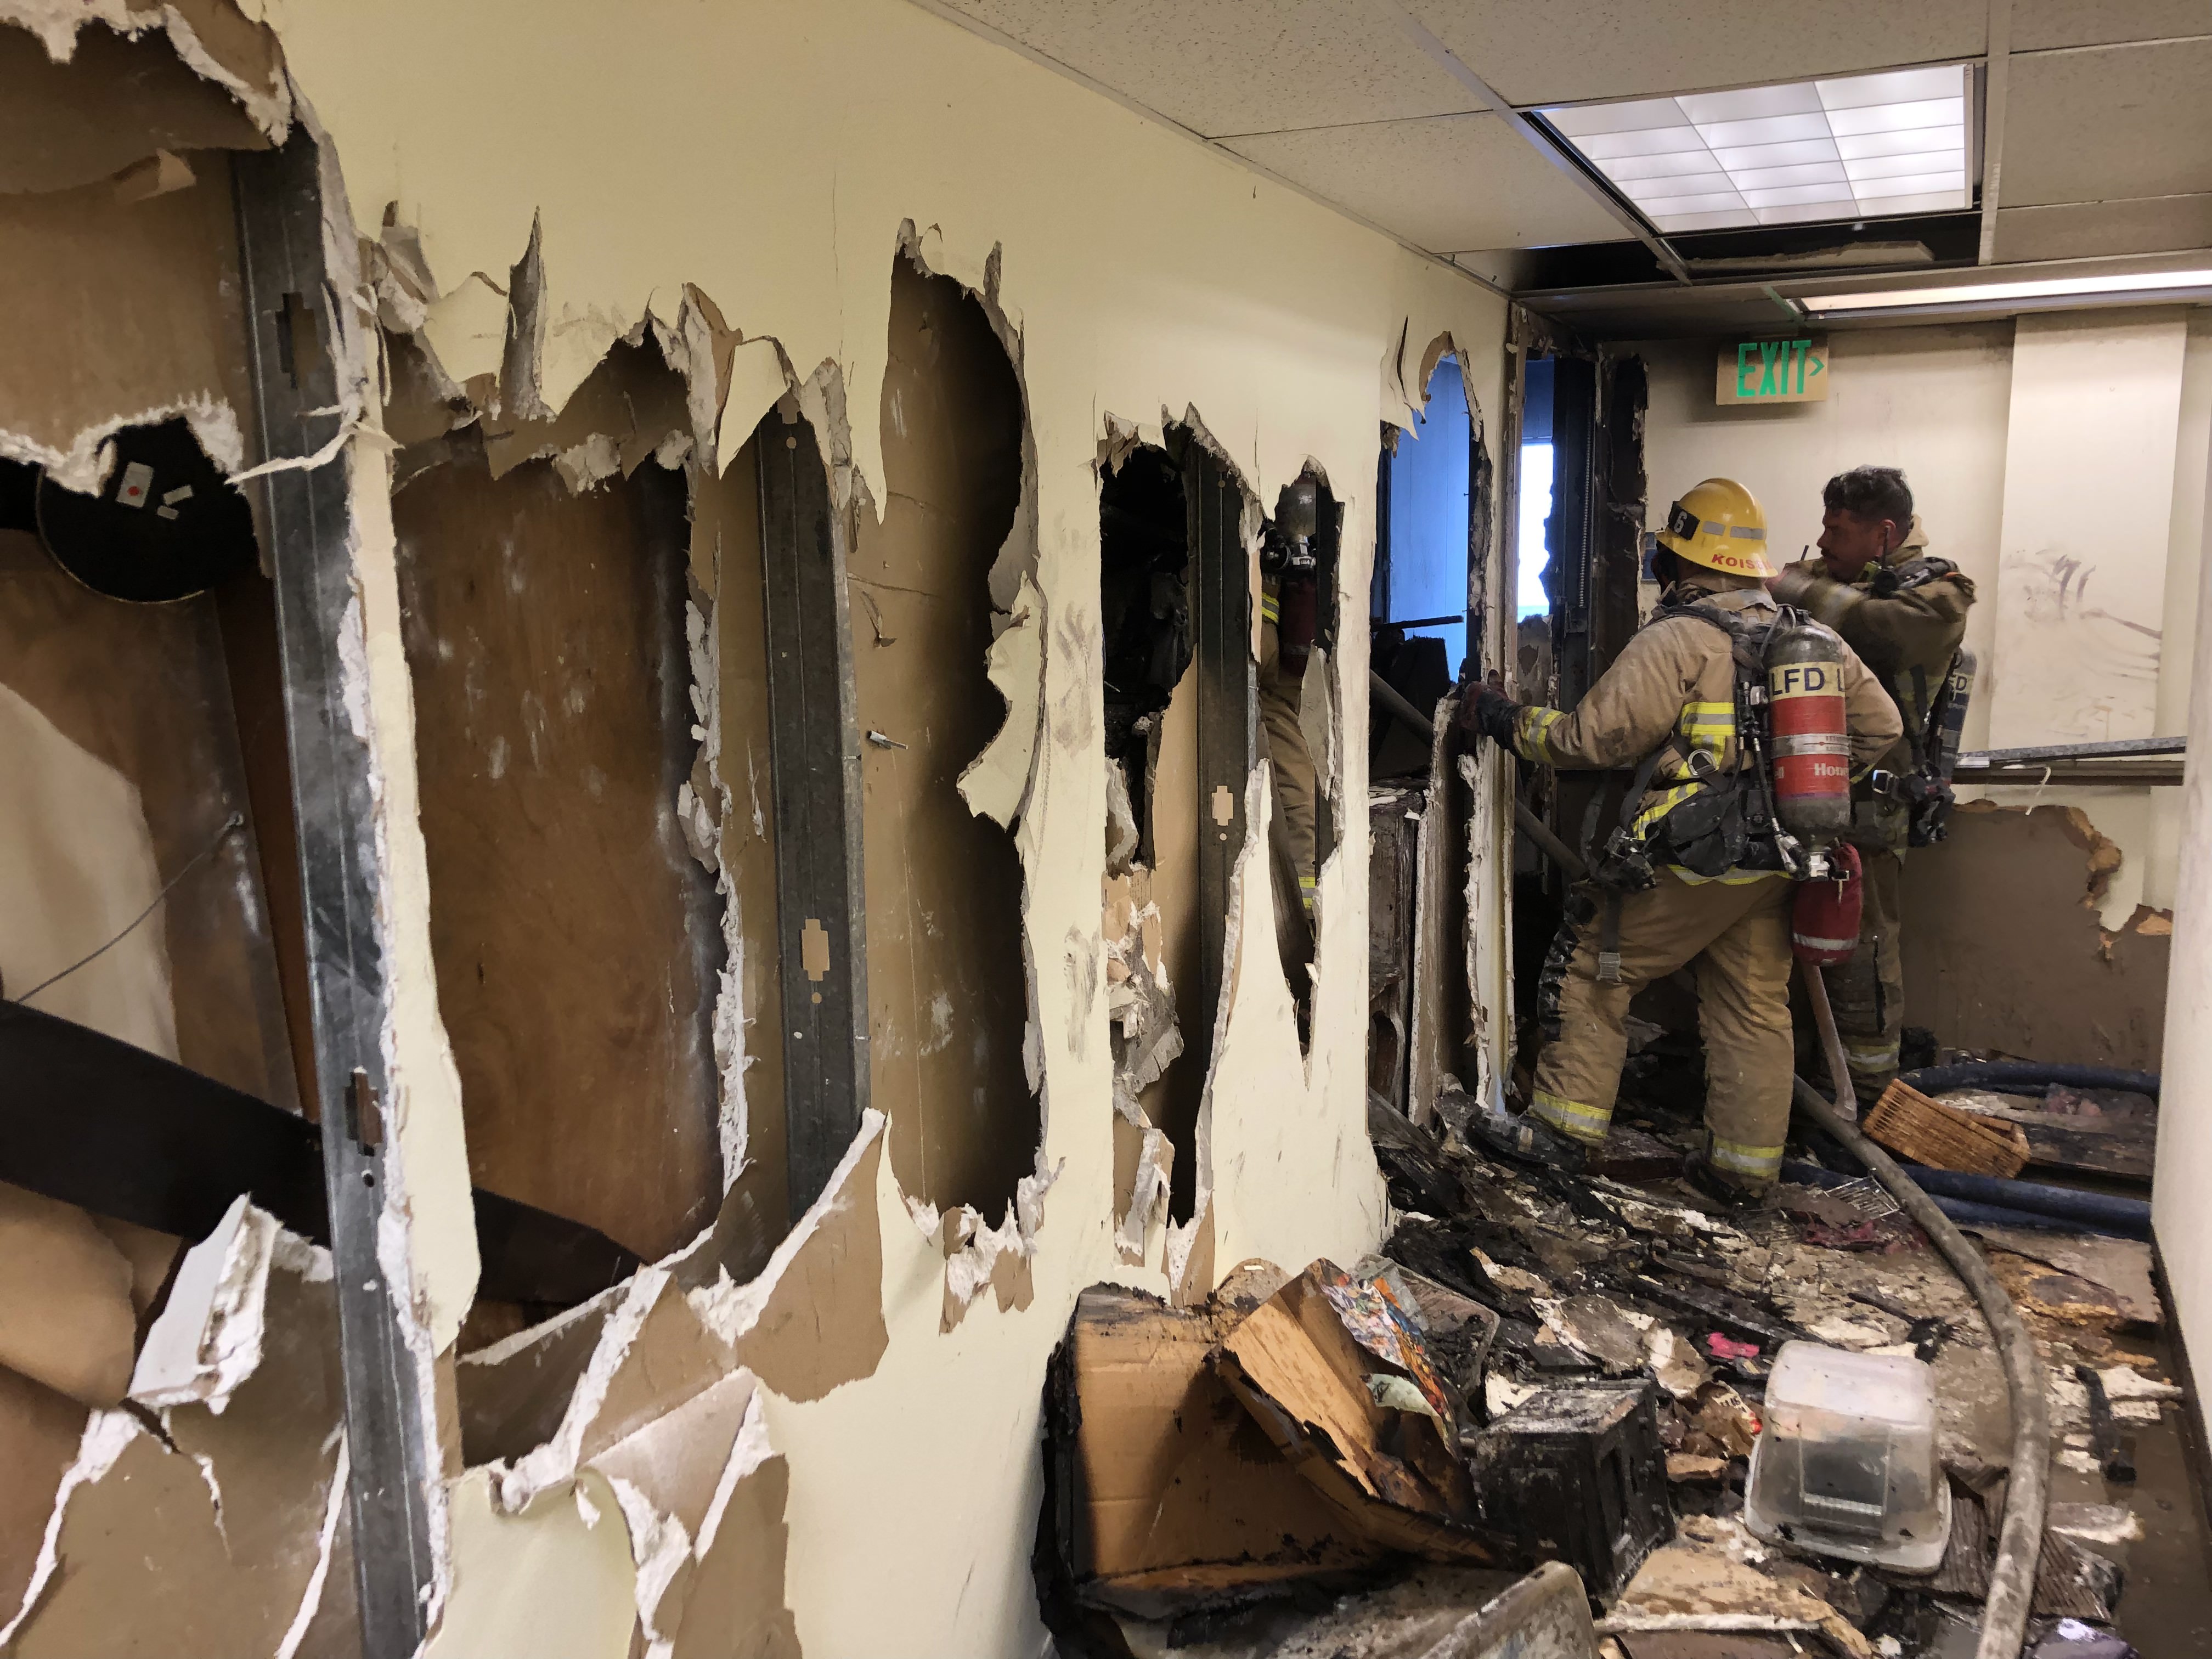 Numerous holes in dry wall seen down the hallway with firefighters